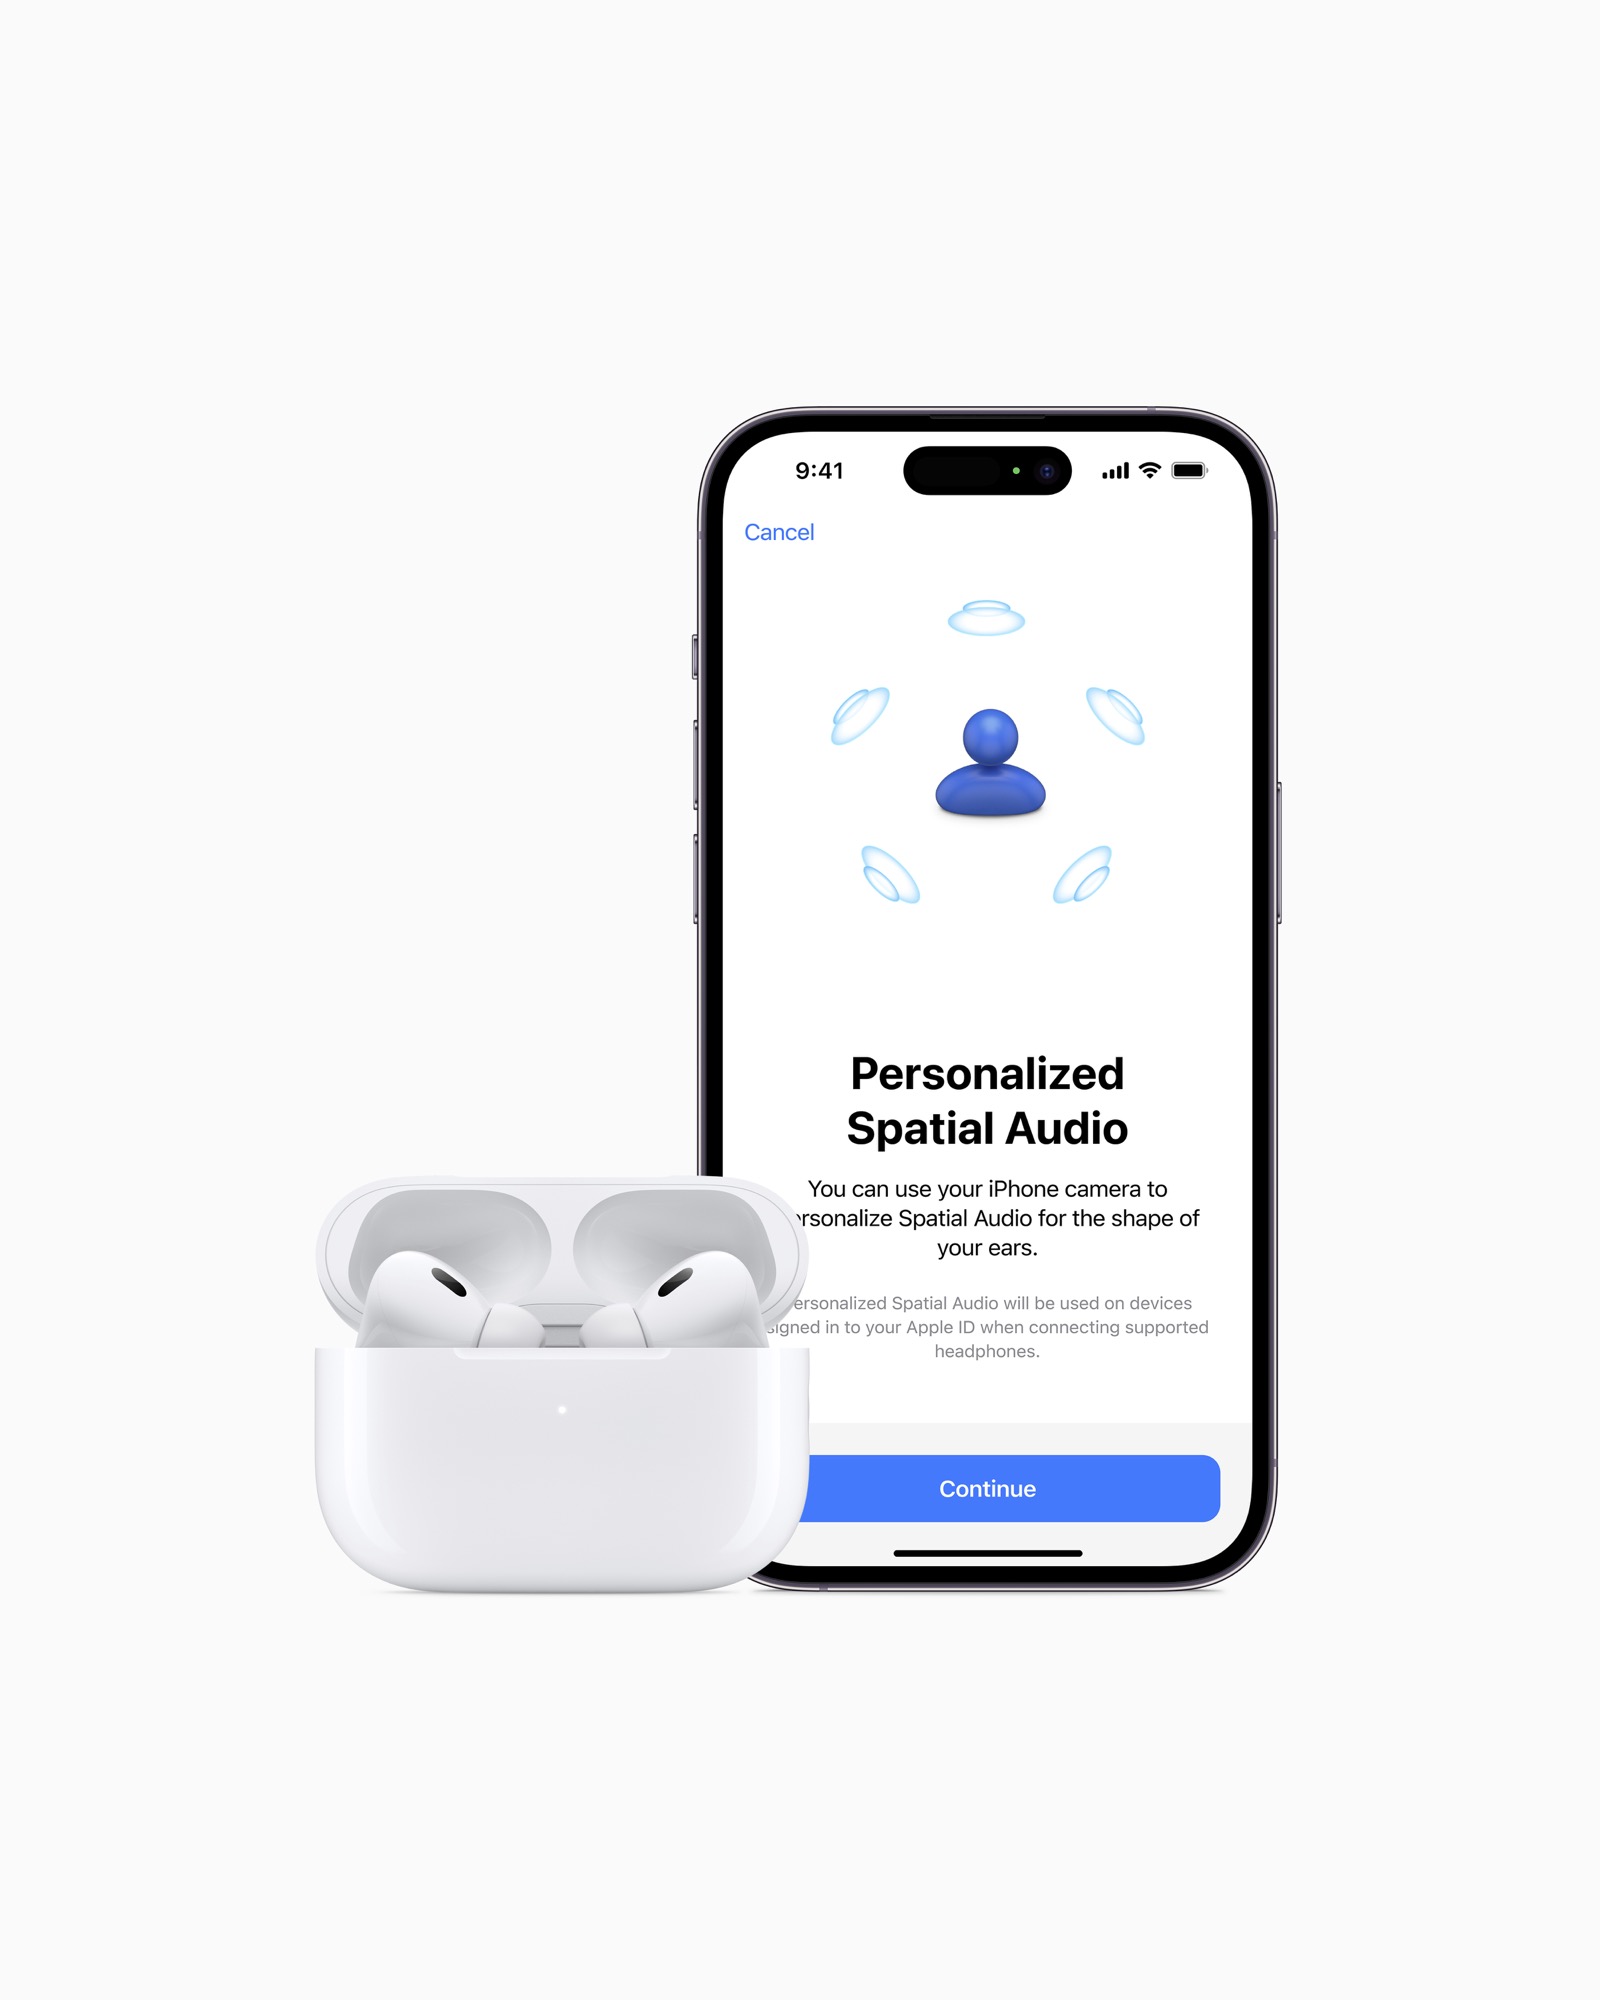 The newly launched AirPods Pro and iPhone 14 support Bluetooth 5.3